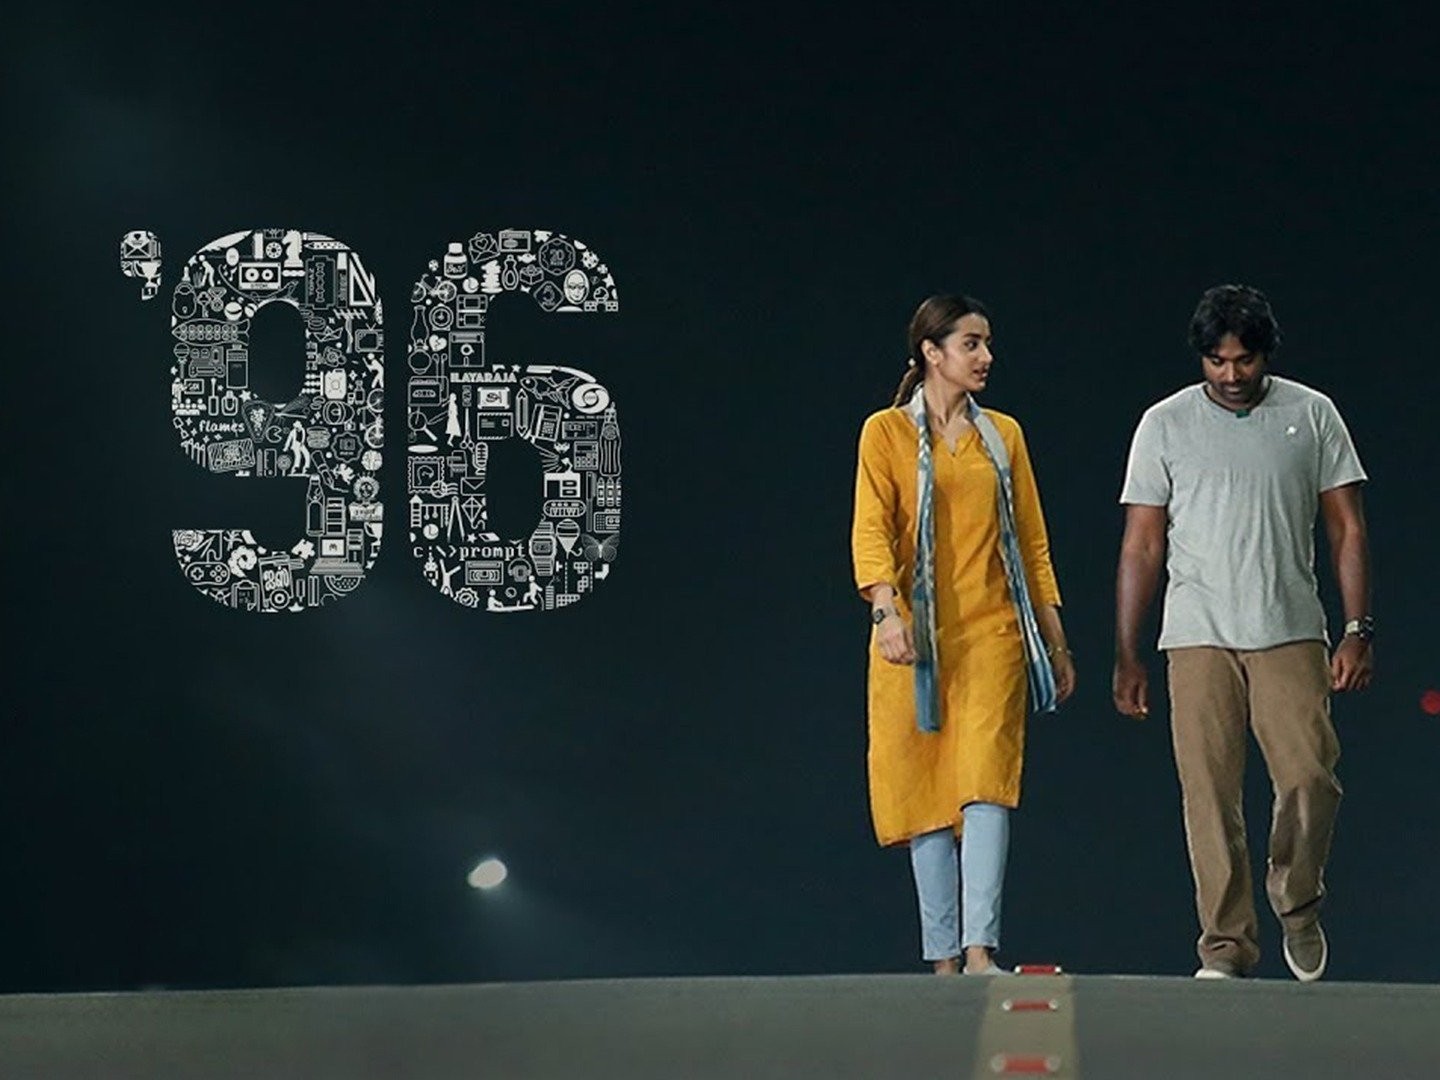 96 Film Review: Epic Love Stories Don't Need A Fairytale Ending